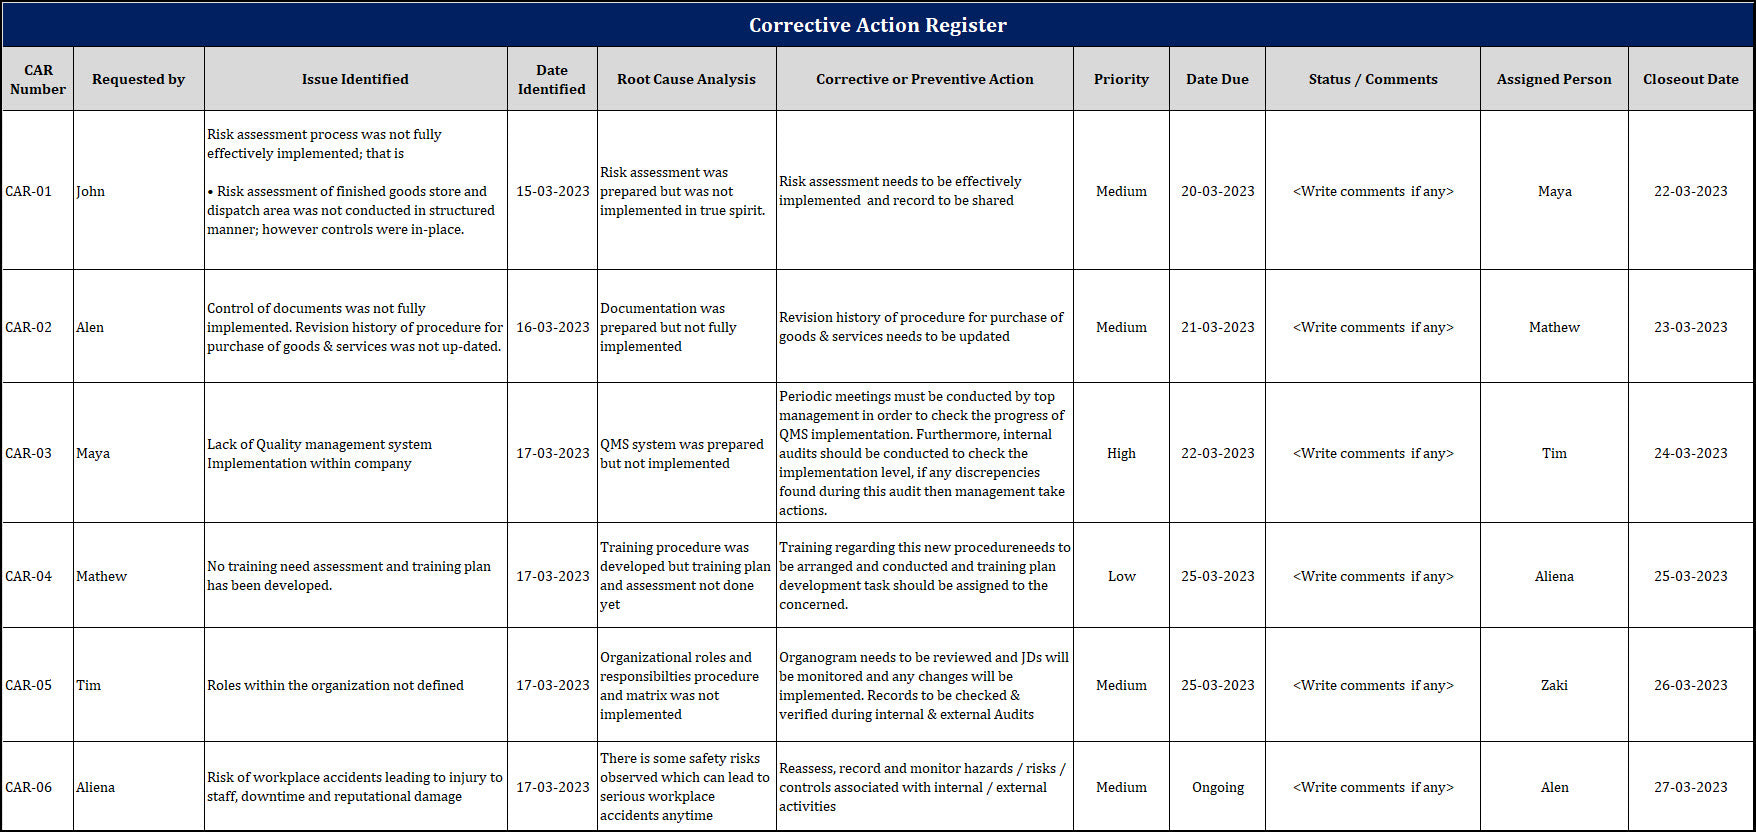 ISO 9001 Corrective Action Register Template